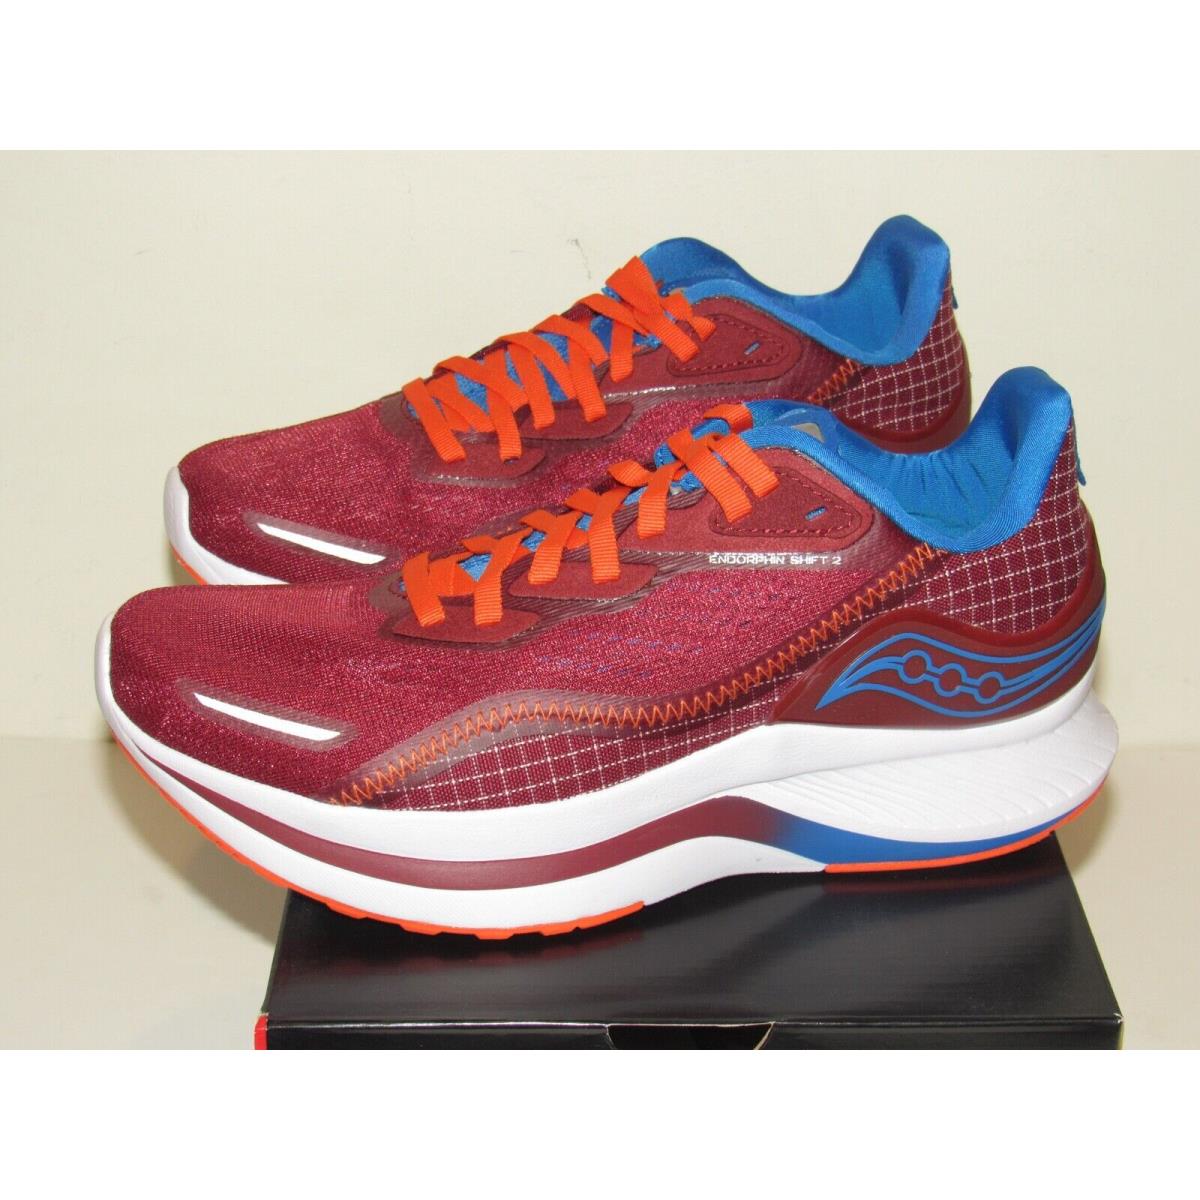 Saucony Endorphin Shift 2 Mens Sz 7.5 Running Shoes Red Mulberry Sneakers